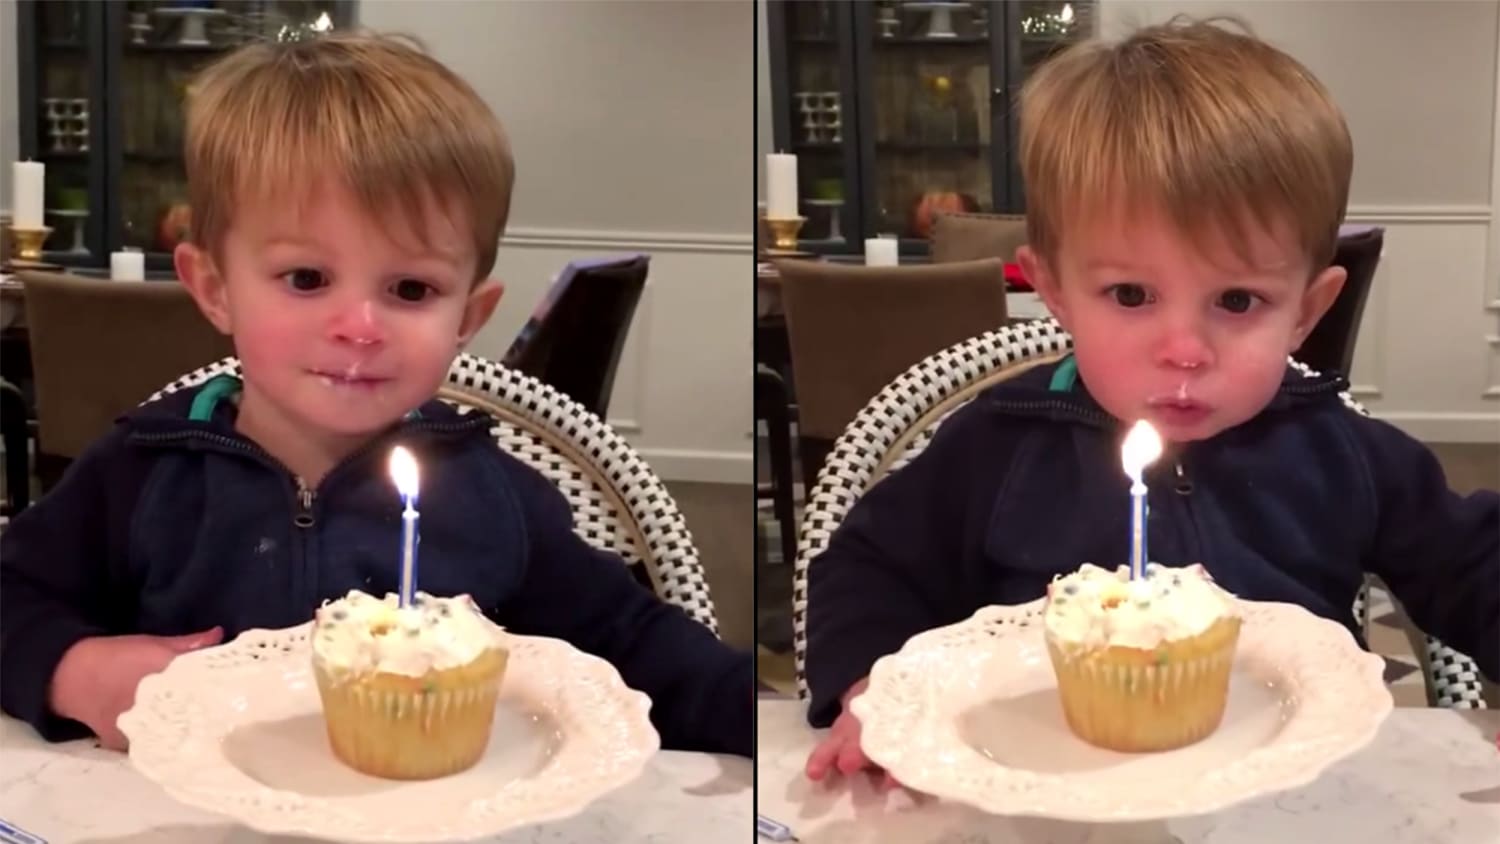 Birthday Traditions: Why Do We Blow Out Candles ? | Petal Talk